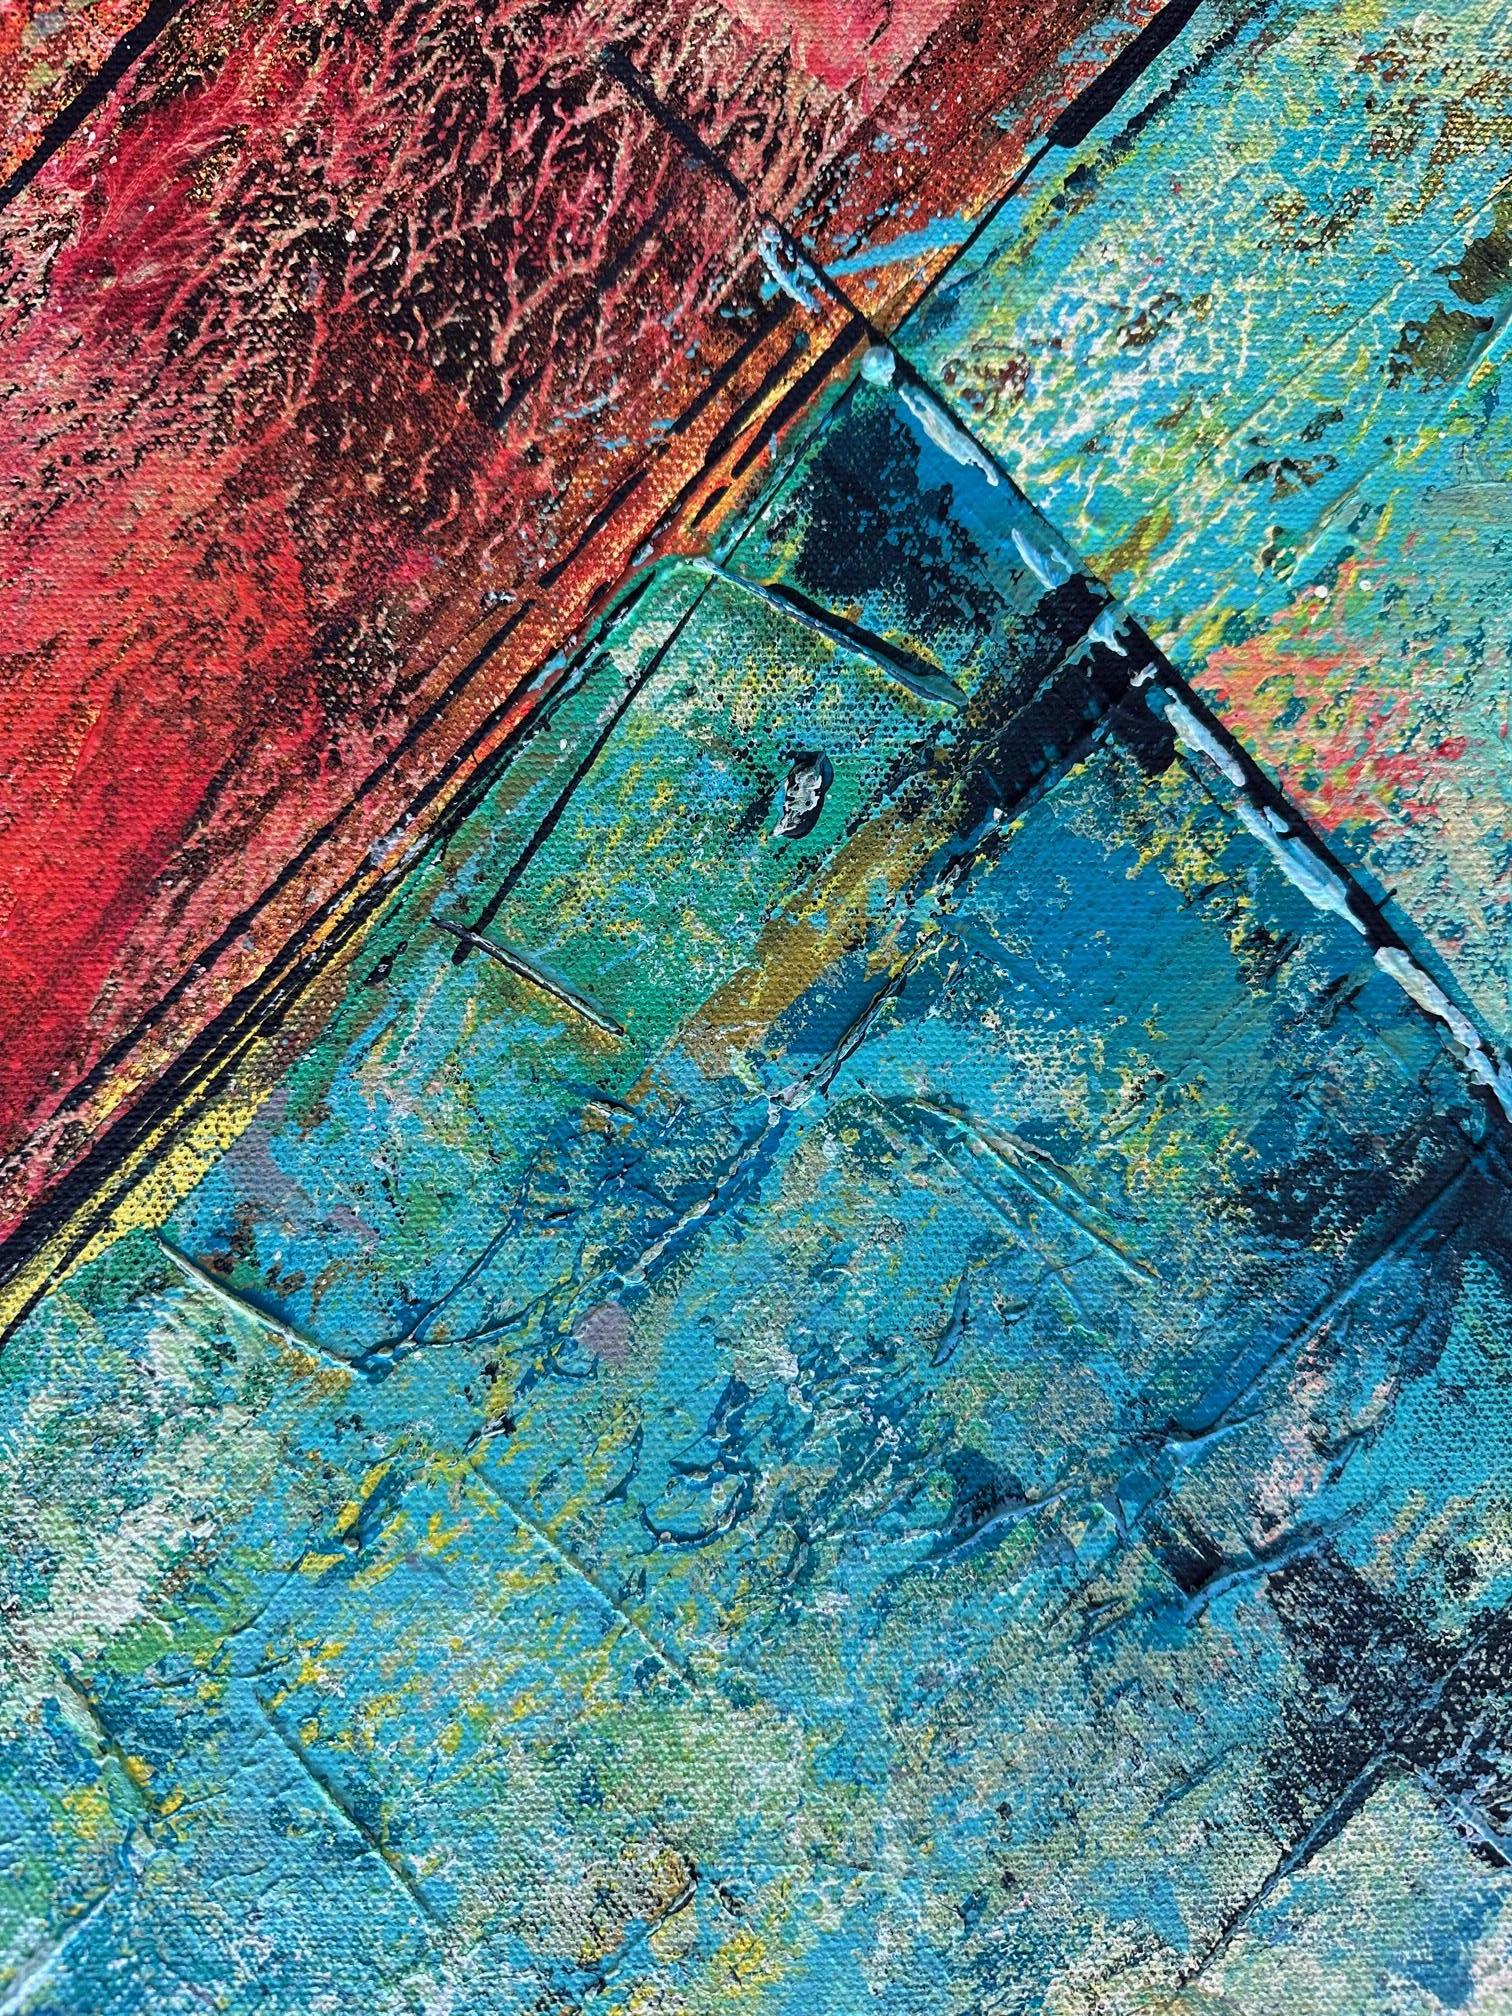 Existence 1 (Diptych) - Oya Bolgun -Abstract Painting - Mixed Media For Sale 4